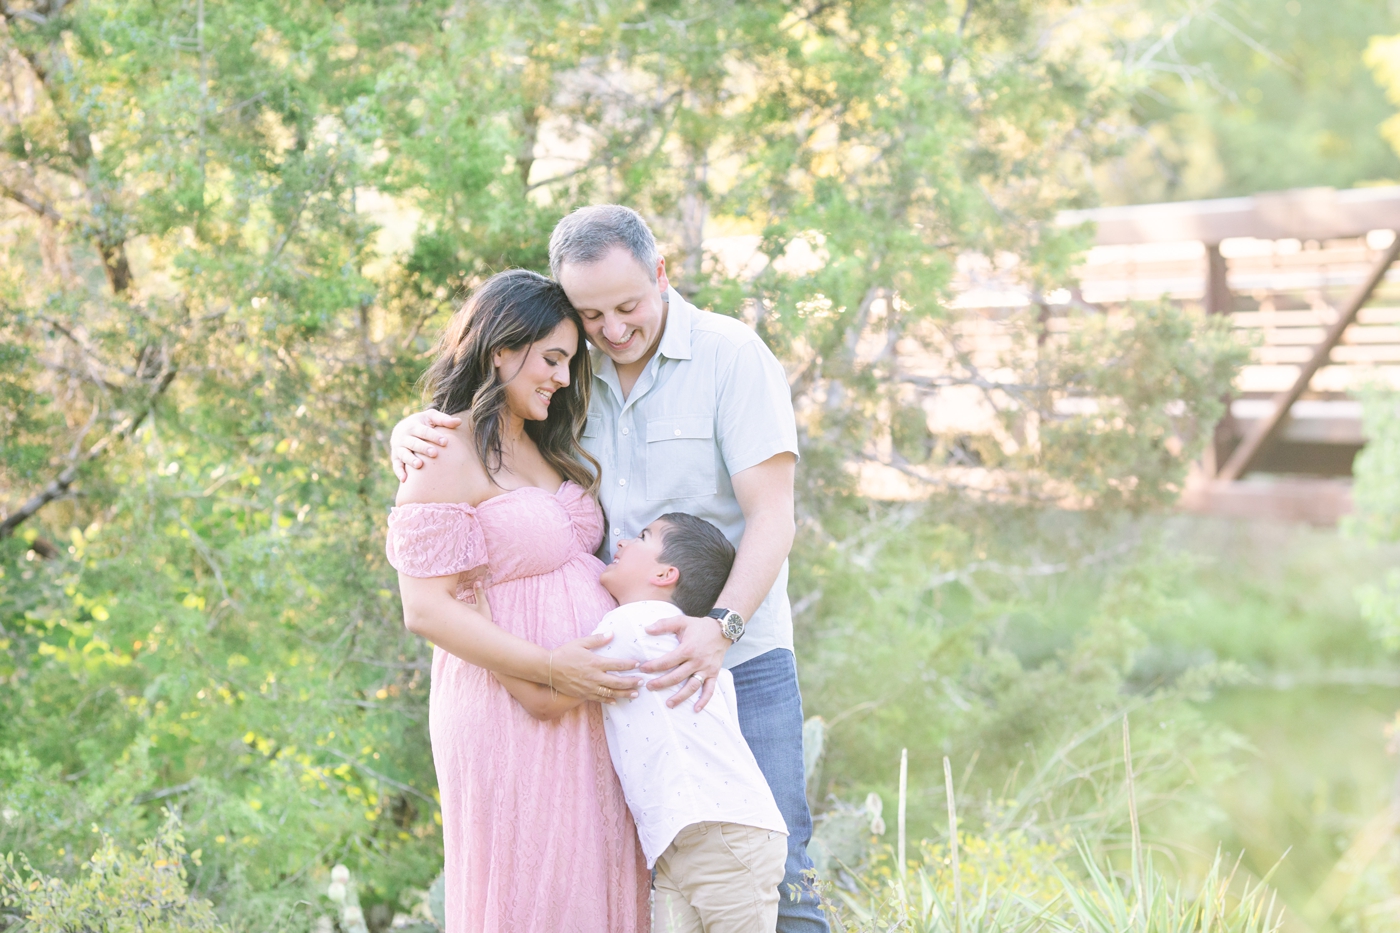 Family of three hugging during park maternity session in Austin TX. Photo by Sana Ahmed Photography.